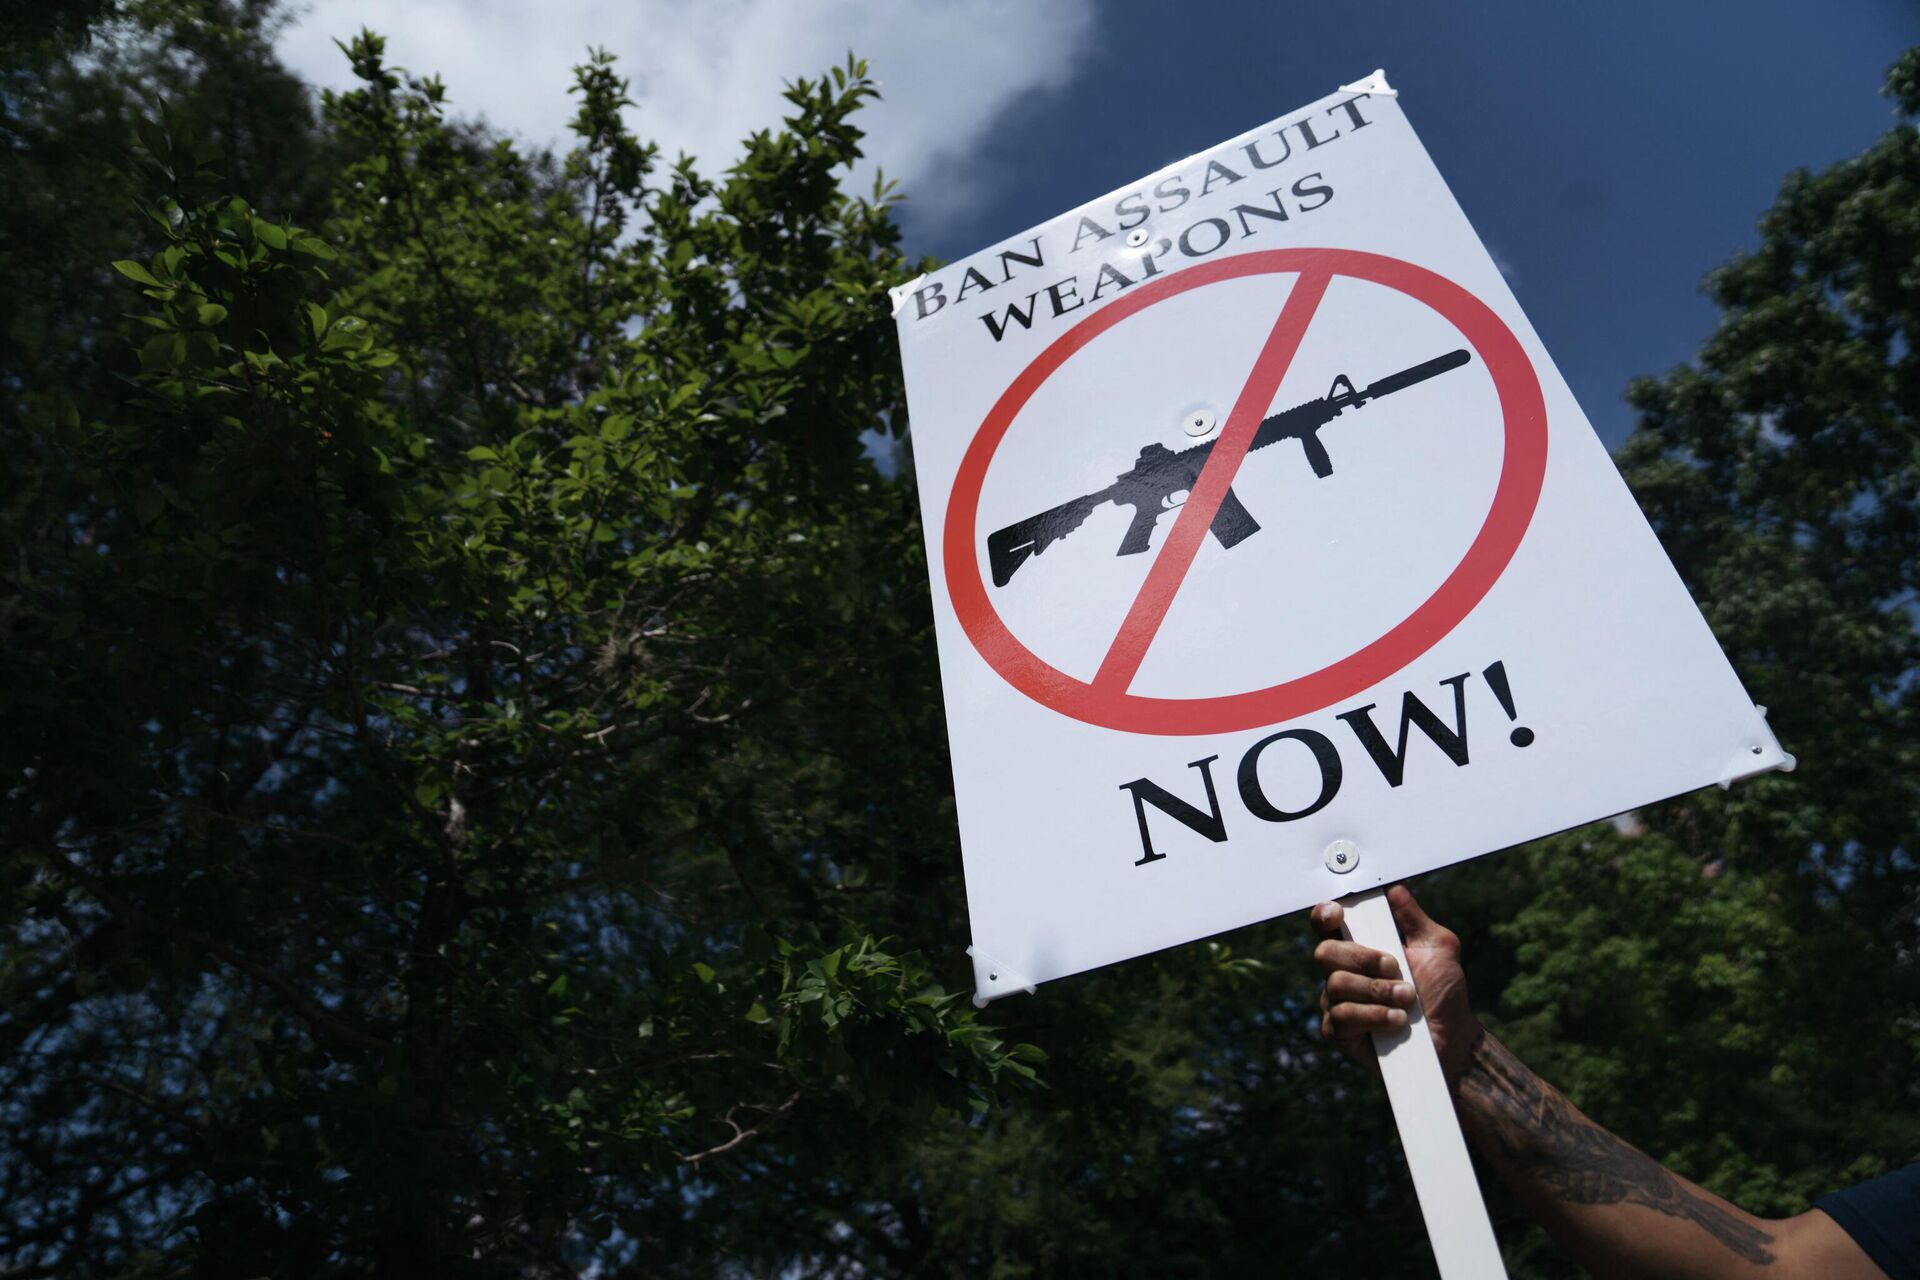 HOUSTON, TX - MAY 27: A gun control advocate holds a sign during a protest across from the National Rifle Association Annual Meeting at the George R. Brown Convention Center, on May 27, 2022 in Houston, Texas.  - Sputnik International, 1920, 25.06.2022